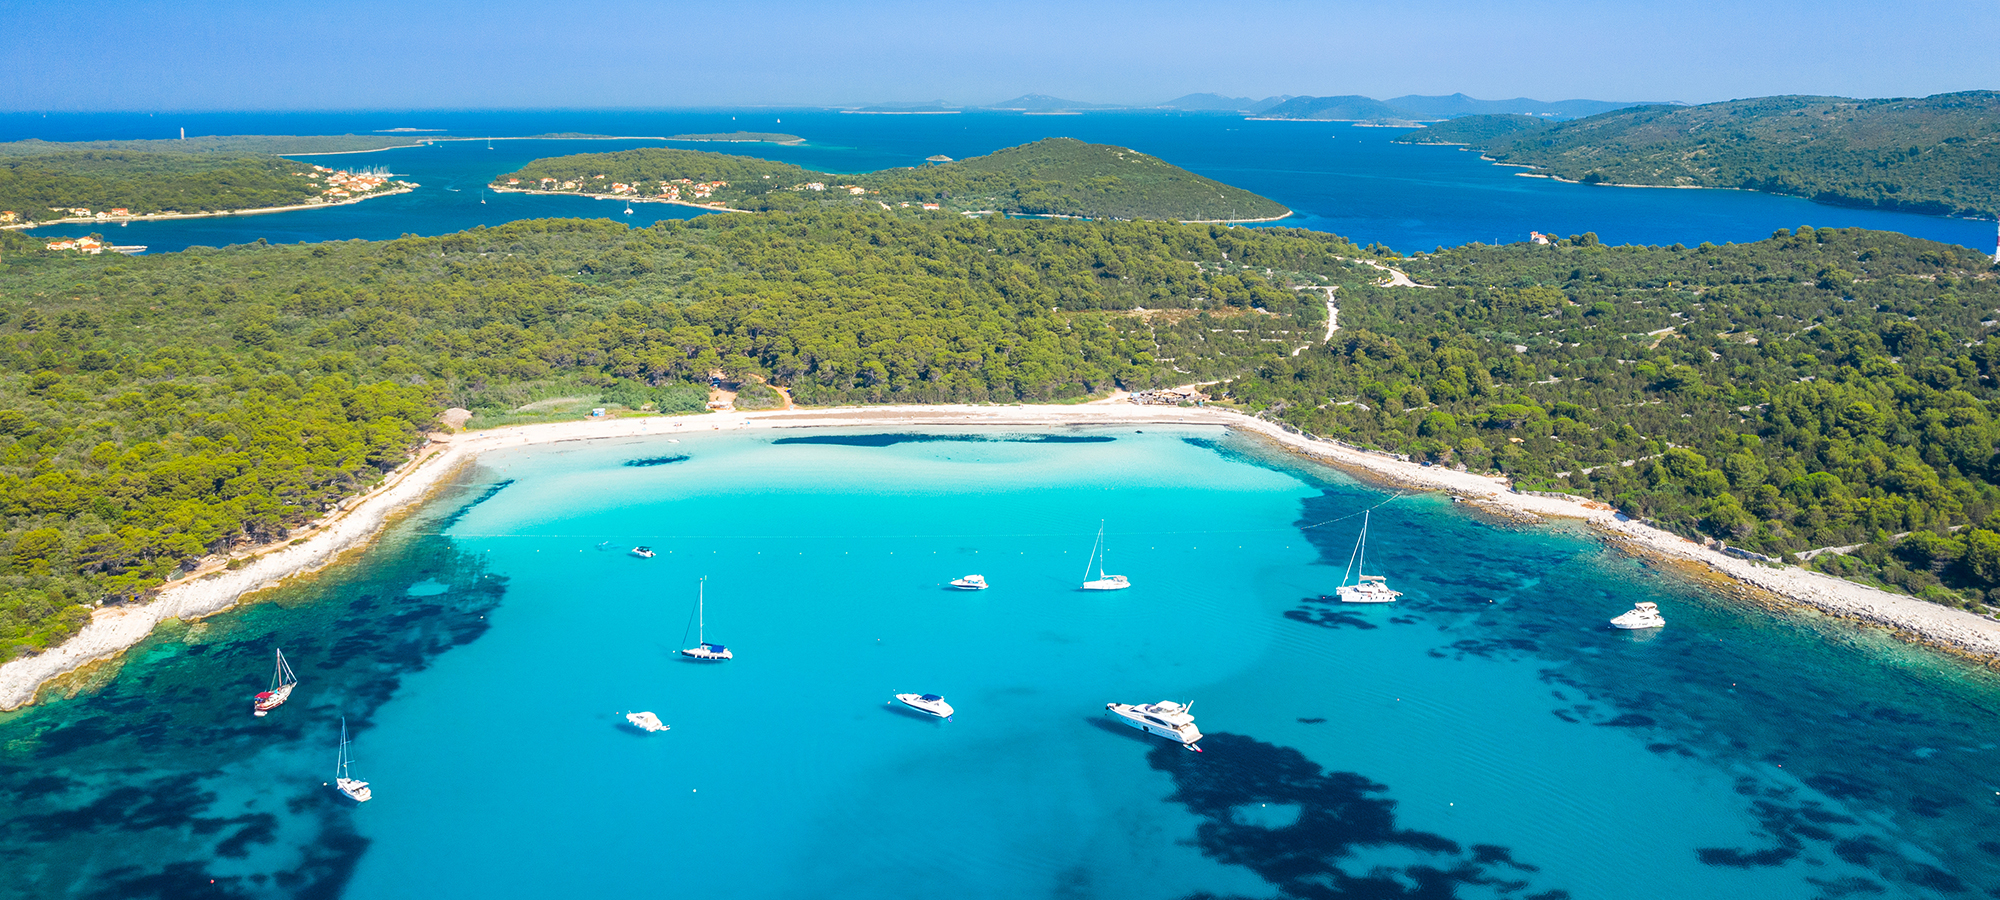 Top 10 Beaches to Visit on Your Croatia Sailing Holiday